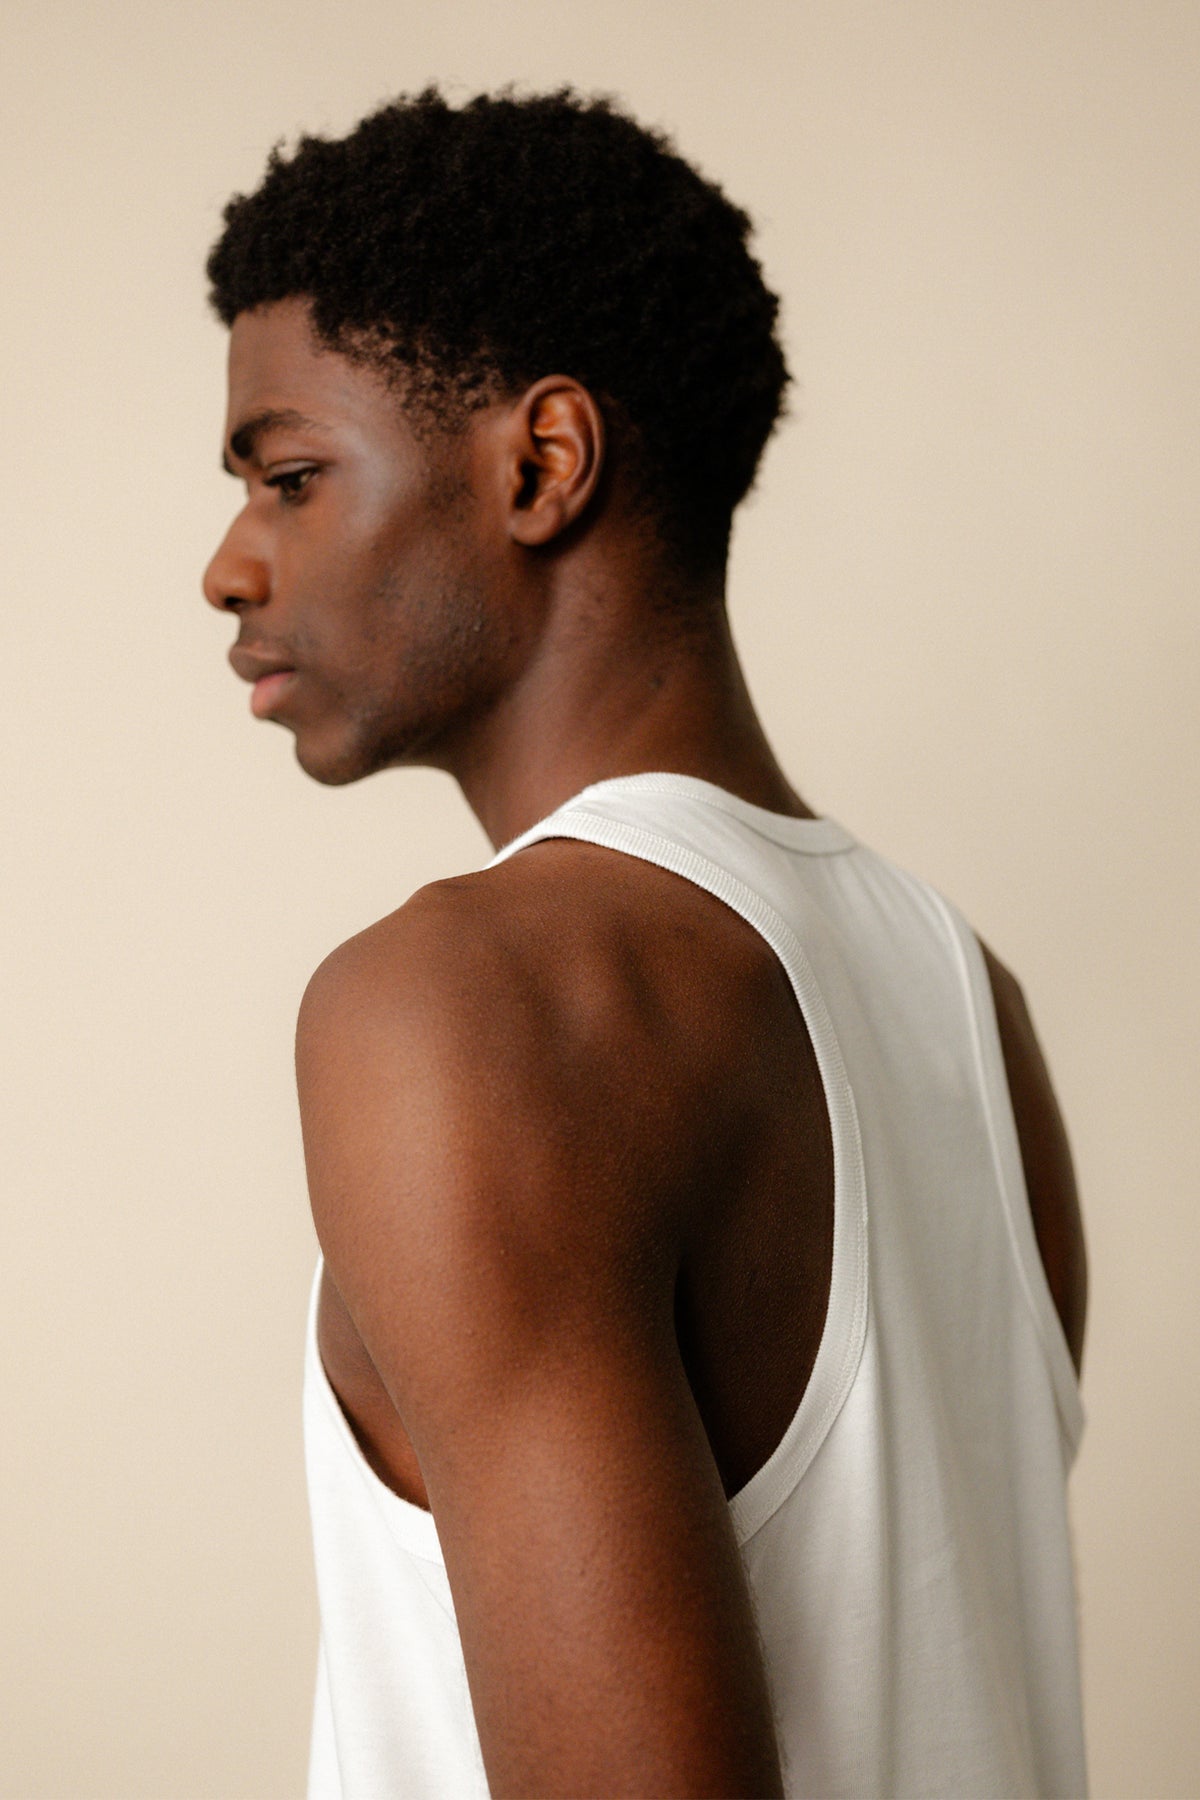 
            Back/side angle of black male showing the racer back of vest in white